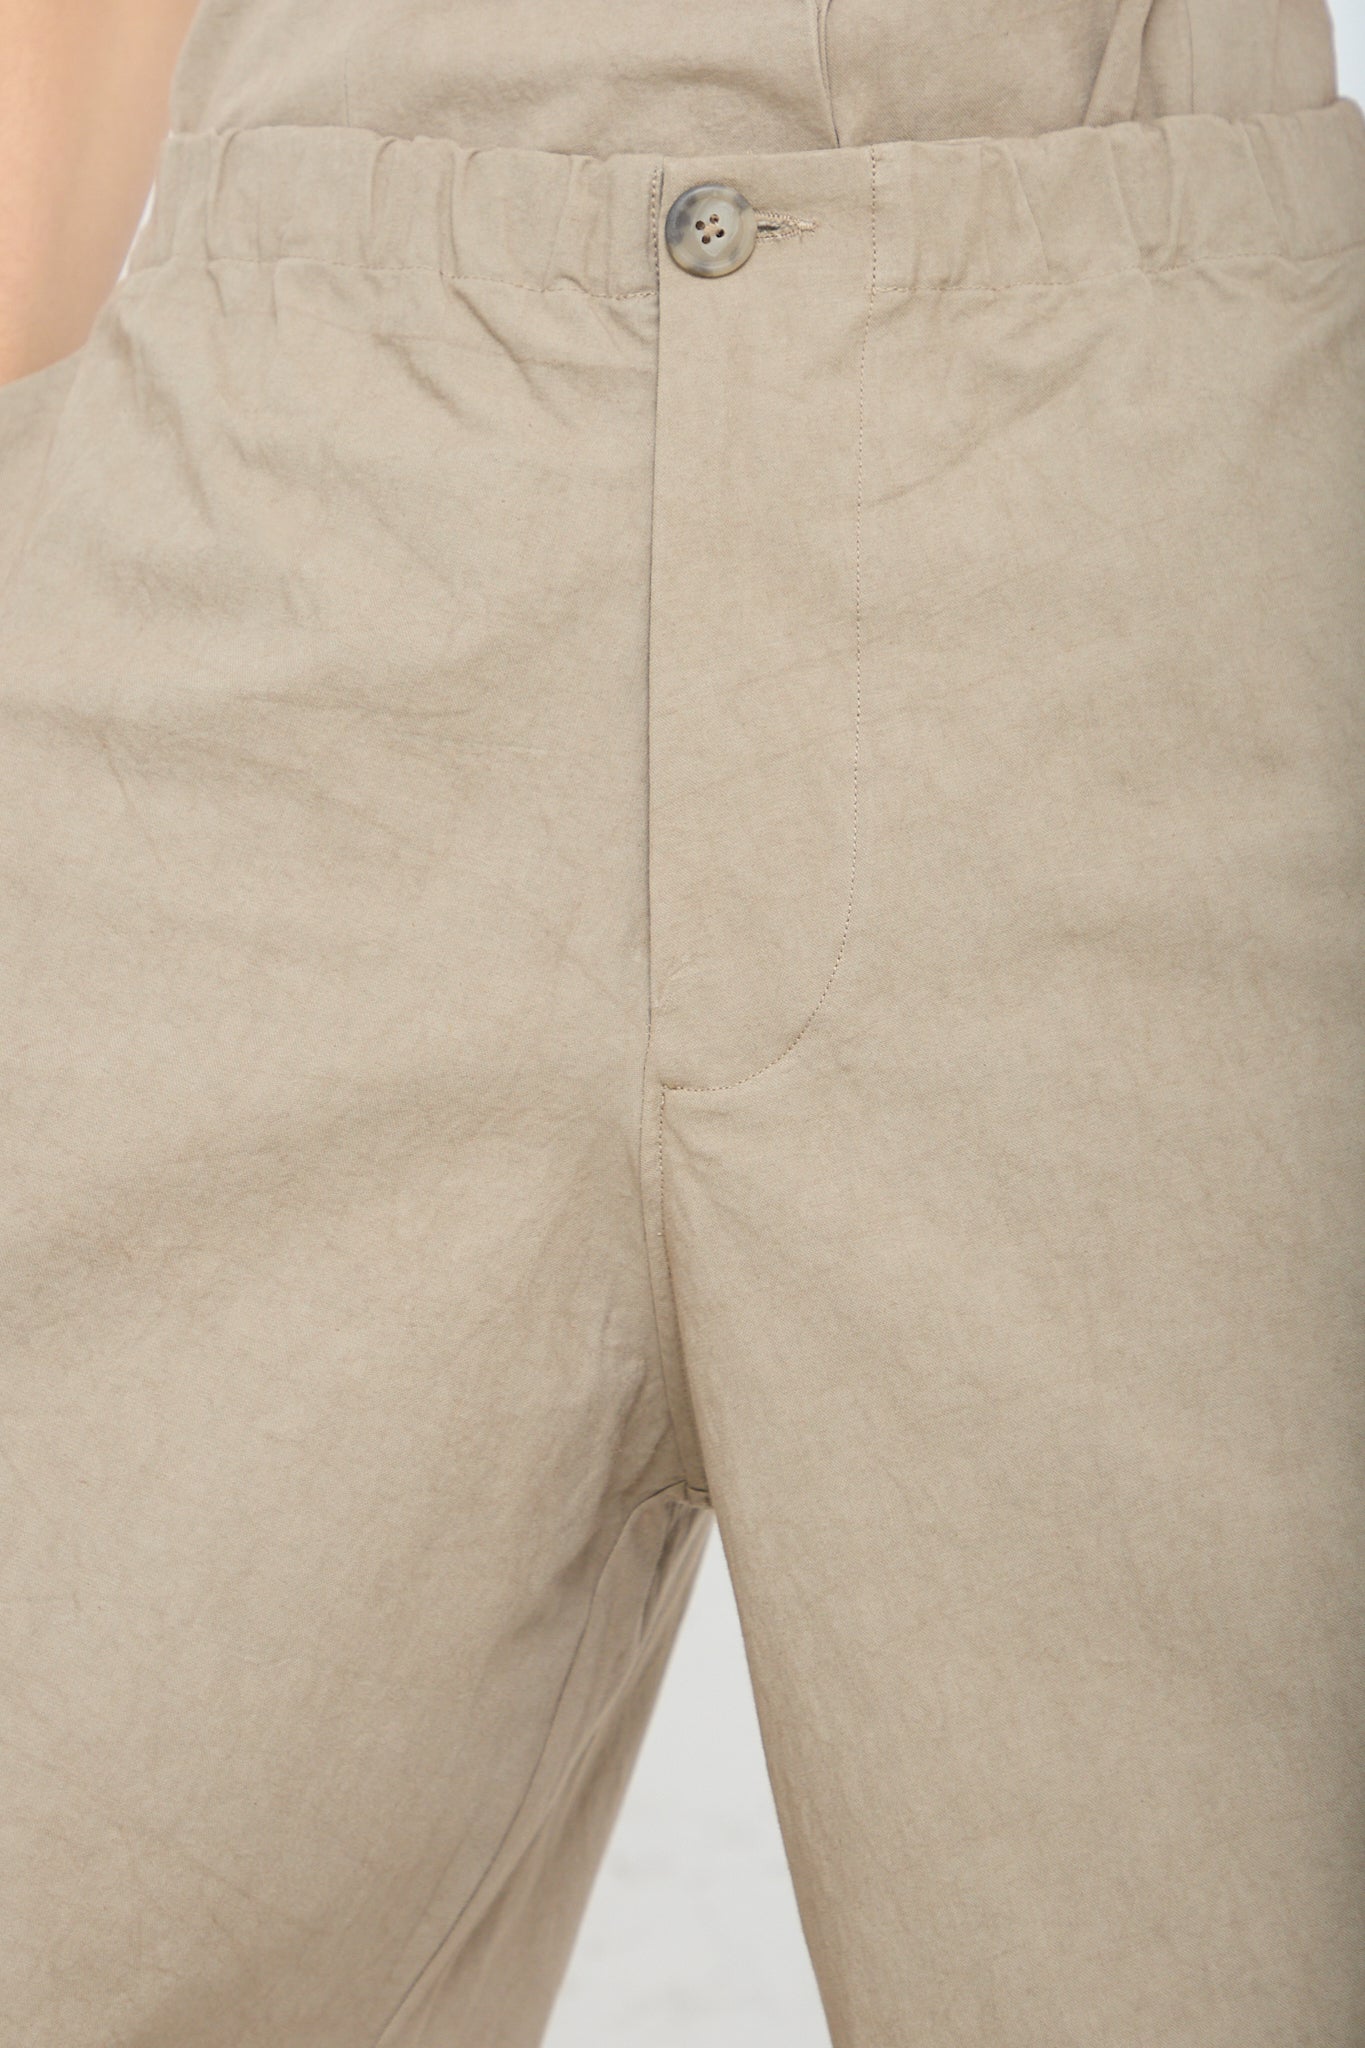 A close up of a woman wearing a pair of Lauren Manoogian's New Structure Pant in Drab (Olive brown). Up close view of waist band and button closure.